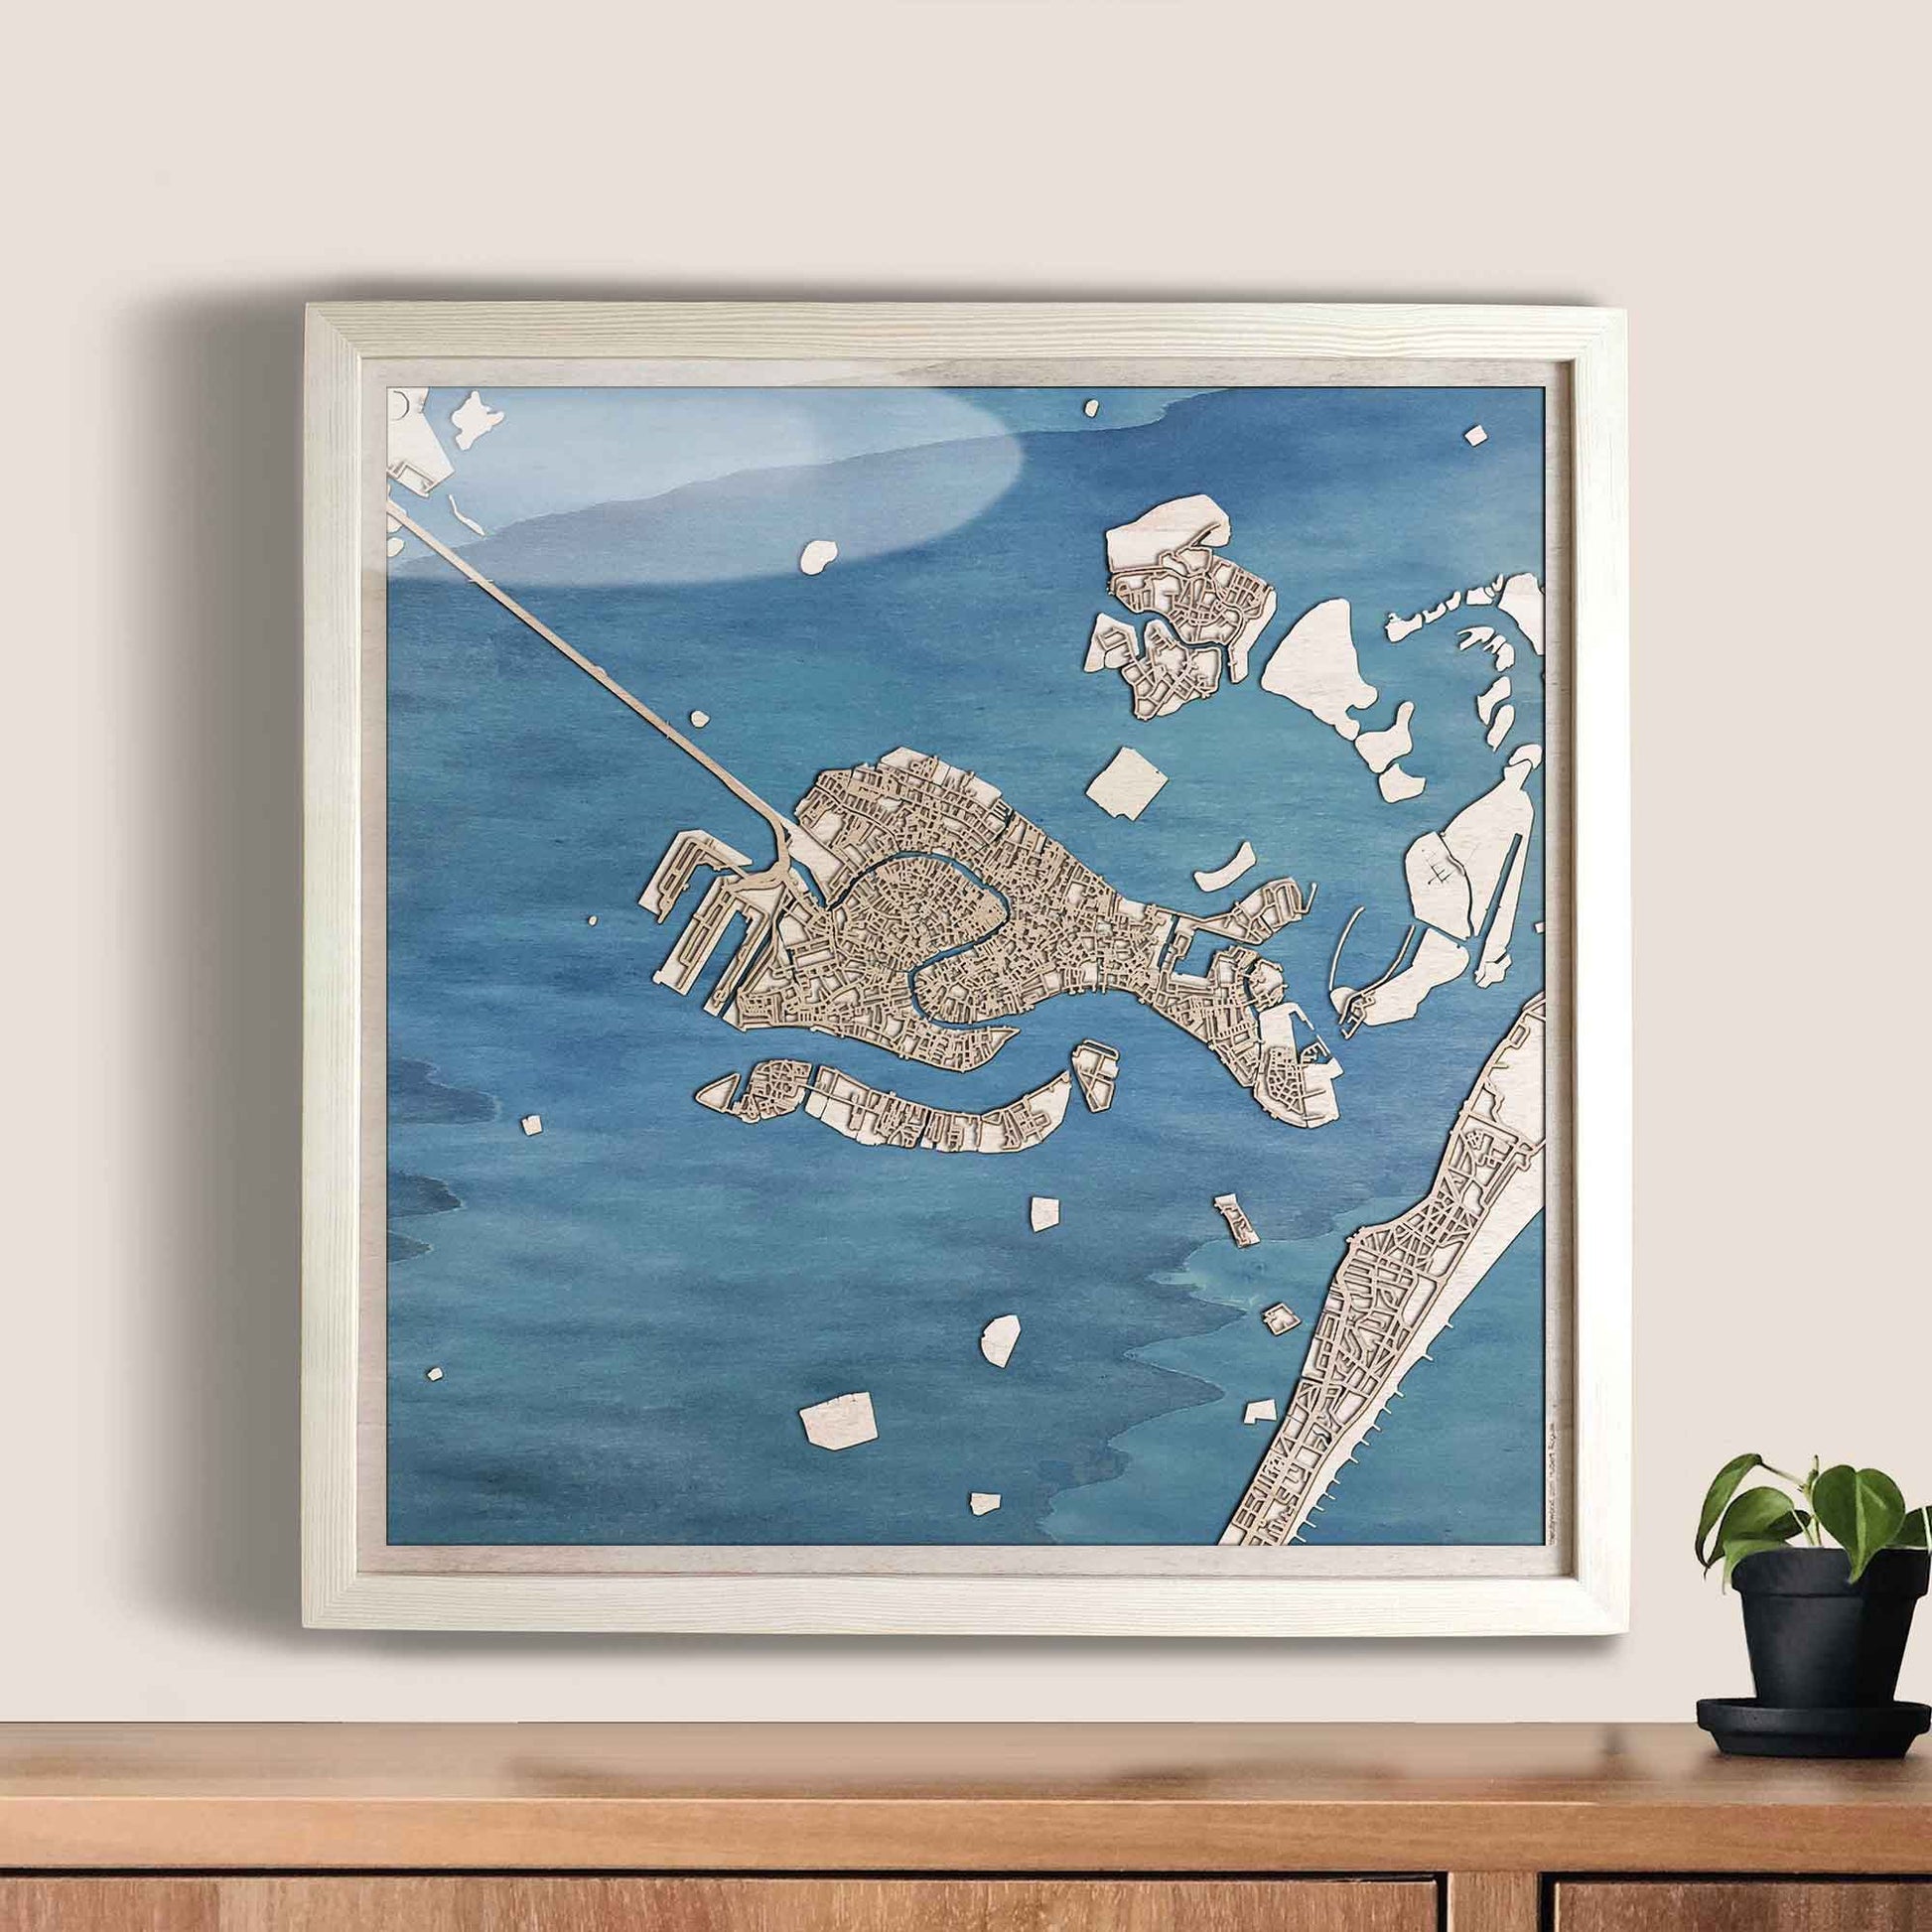 Venice Wooden Map by CityWood - Custom Wood Map Art - Unique Laser Cut Engraved - Anniversary Gift